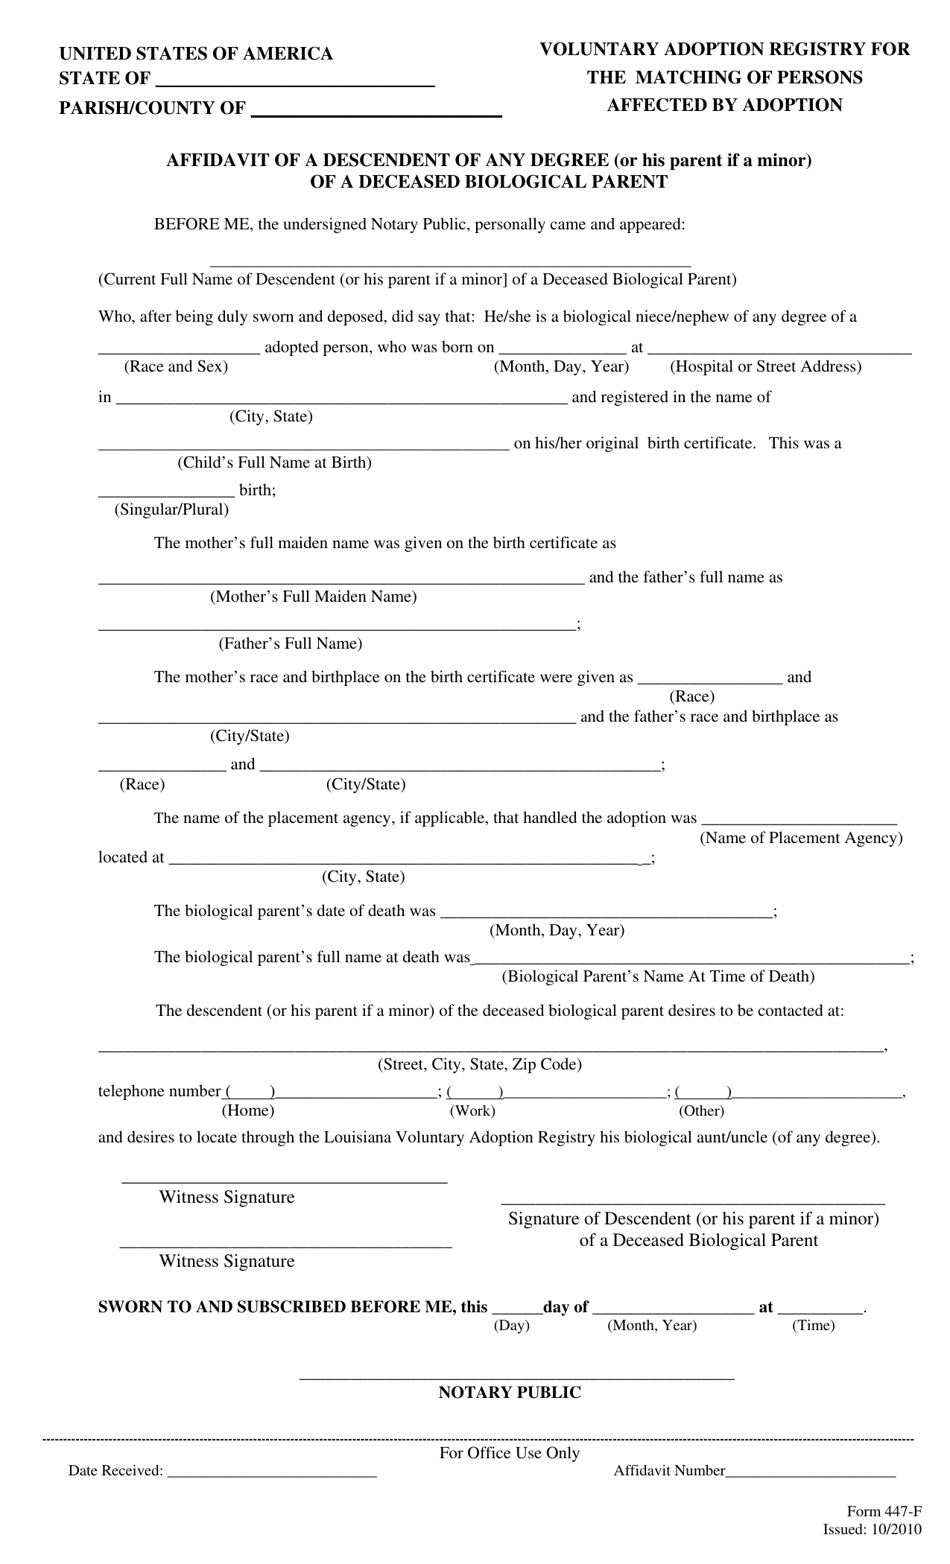 Form 447-F Affidavit of a Descendent of Any Degree (Or His Parent if a Minor) of a Deceased Biological Parent - Louisiana, Page 1